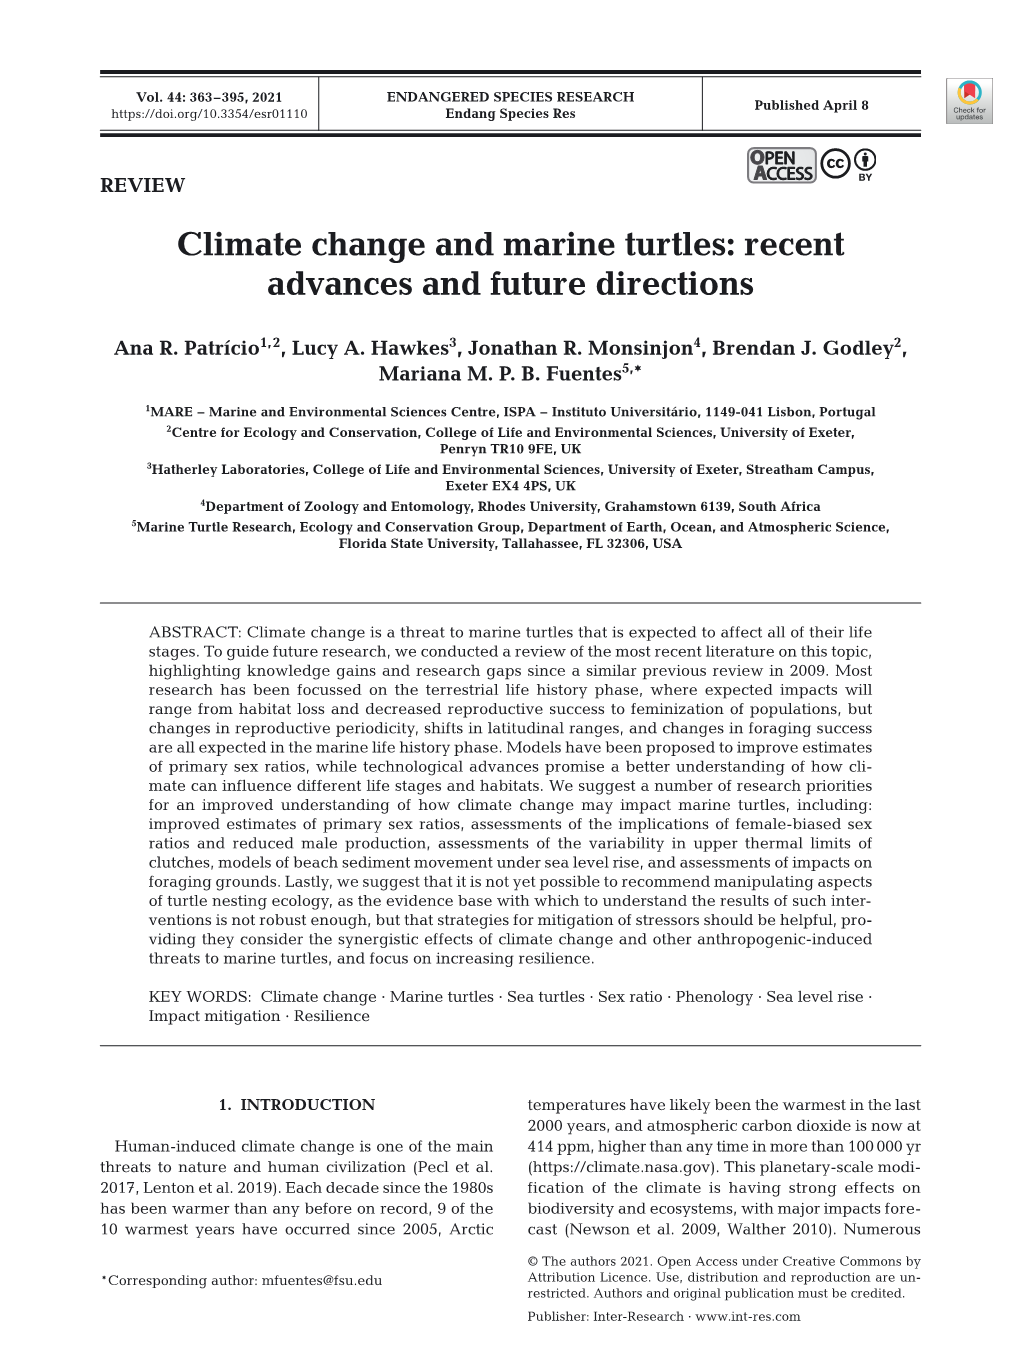 Climate Change and Marine Turtles: Recent Advances and Future Directions